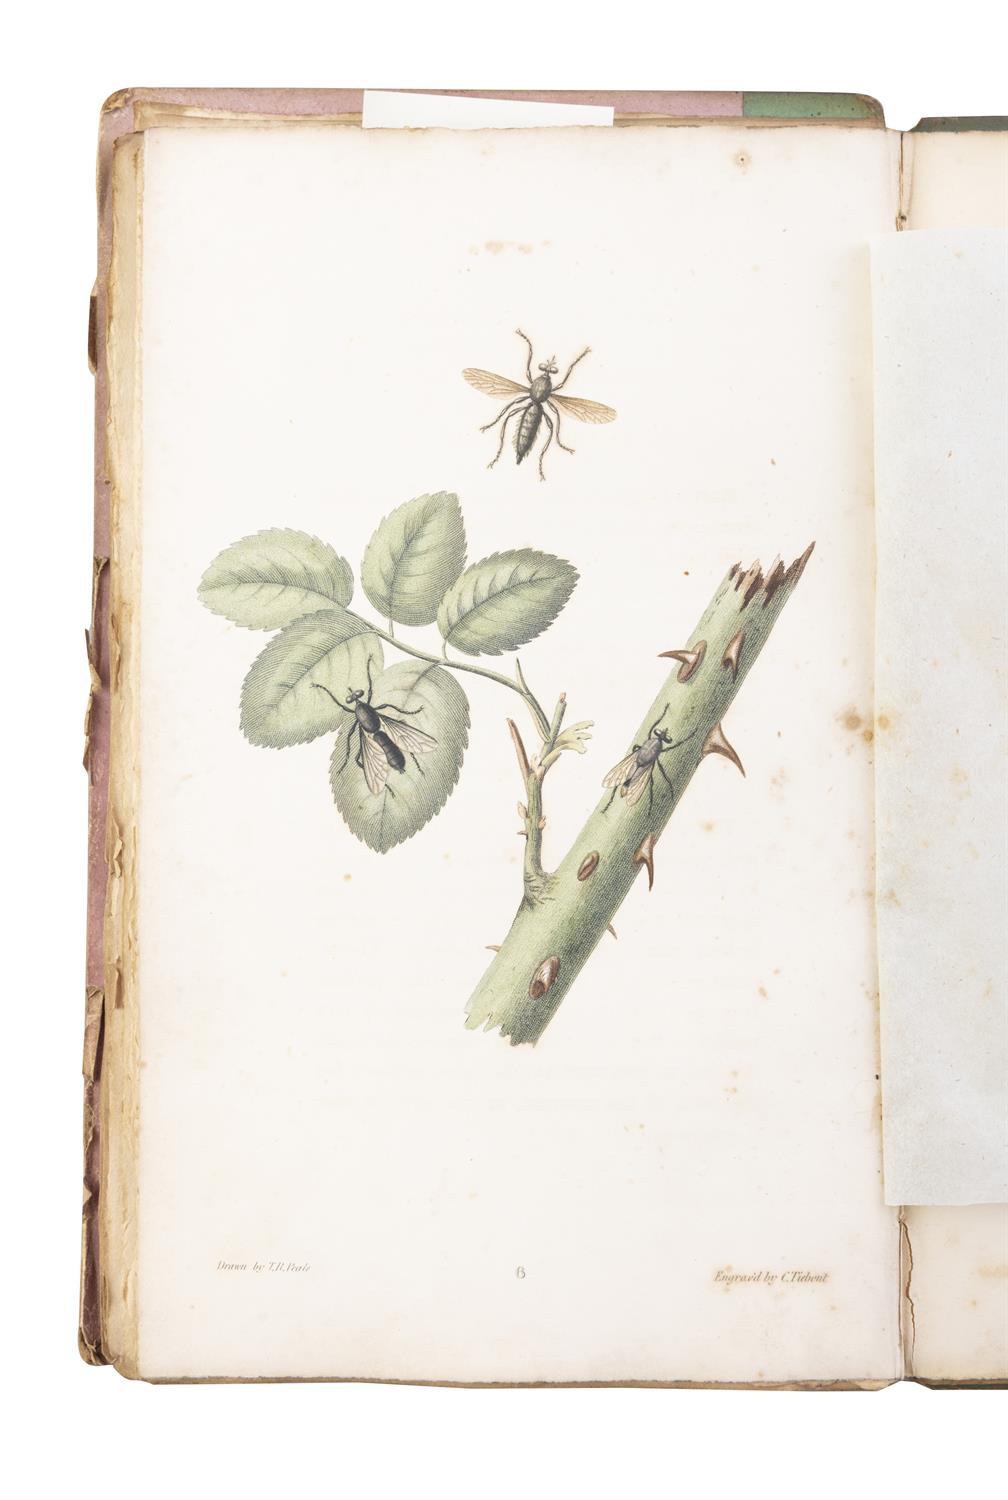 SAY, Thomas [1787-1834] American Entomology or Descriptions of the insects of North America, - Image 6 of 22